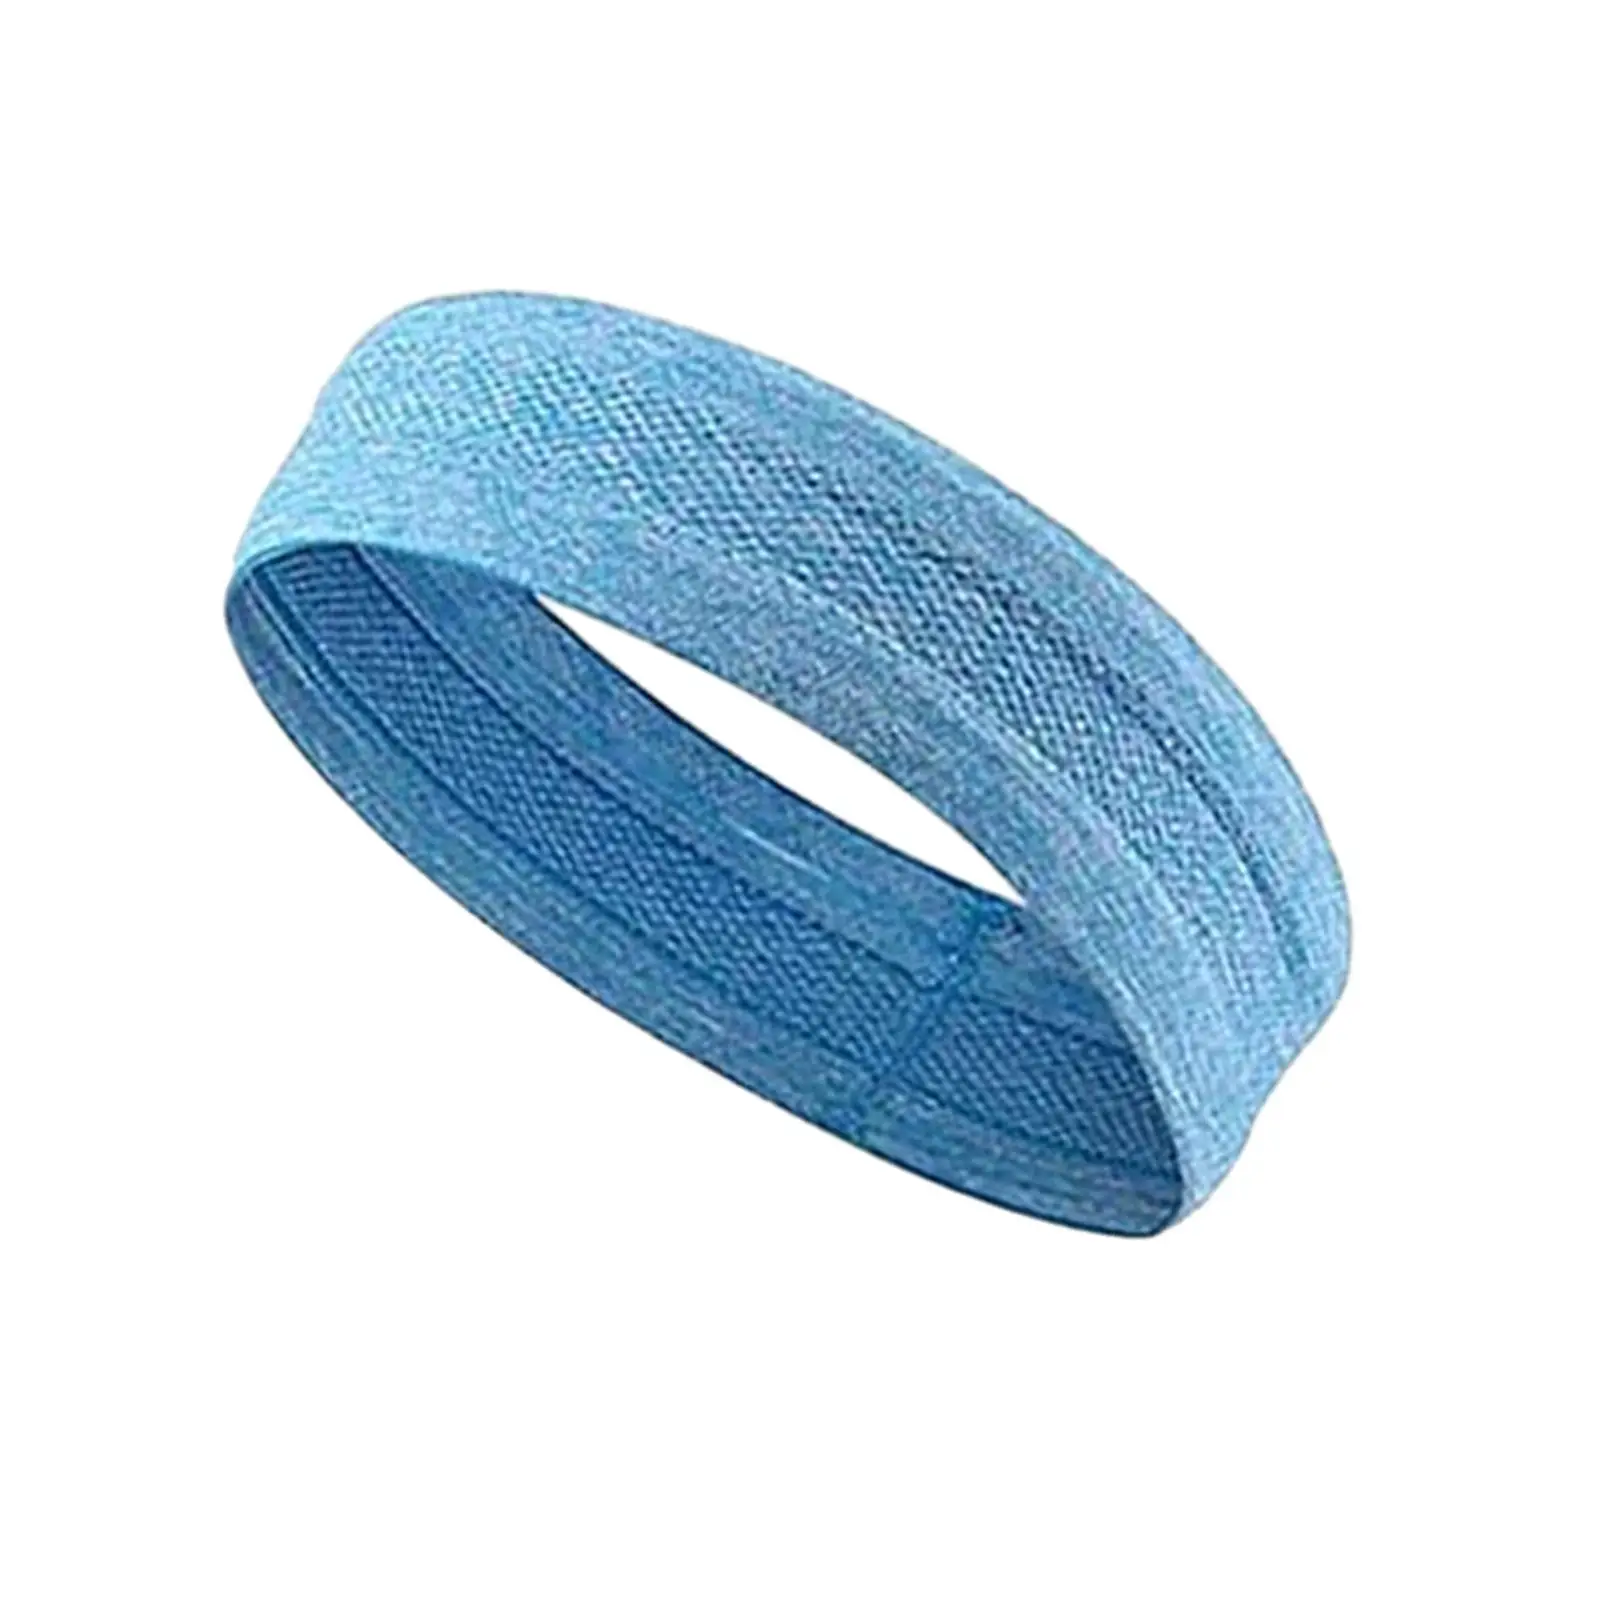 Sweatband Elastic Sports Headbands for Working Out Soccer Cross Training